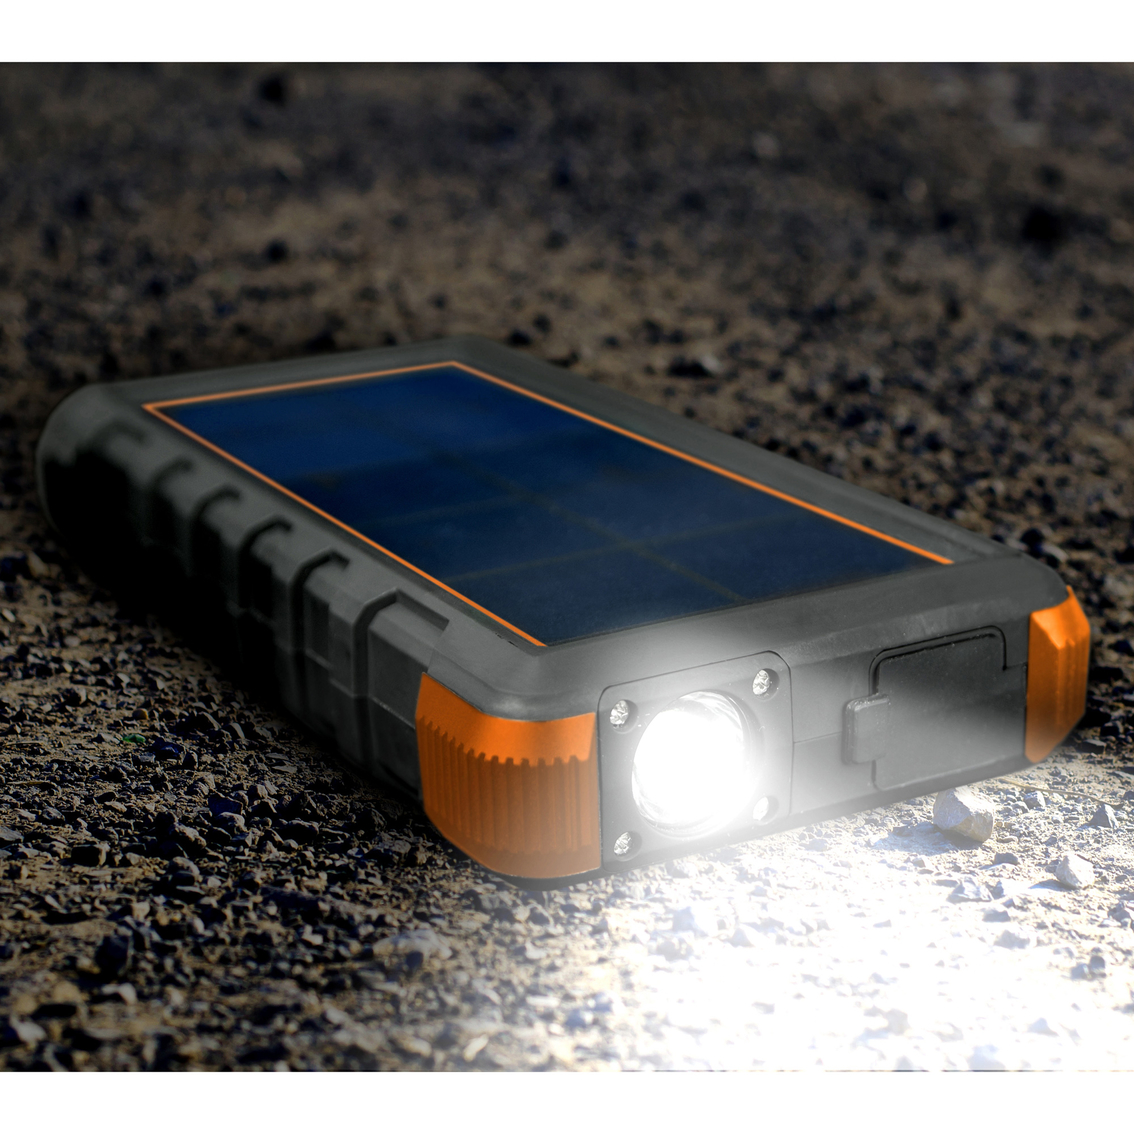 ToughTested Big Foot Solar Battery Pack 24000mAh - Image 3 of 5